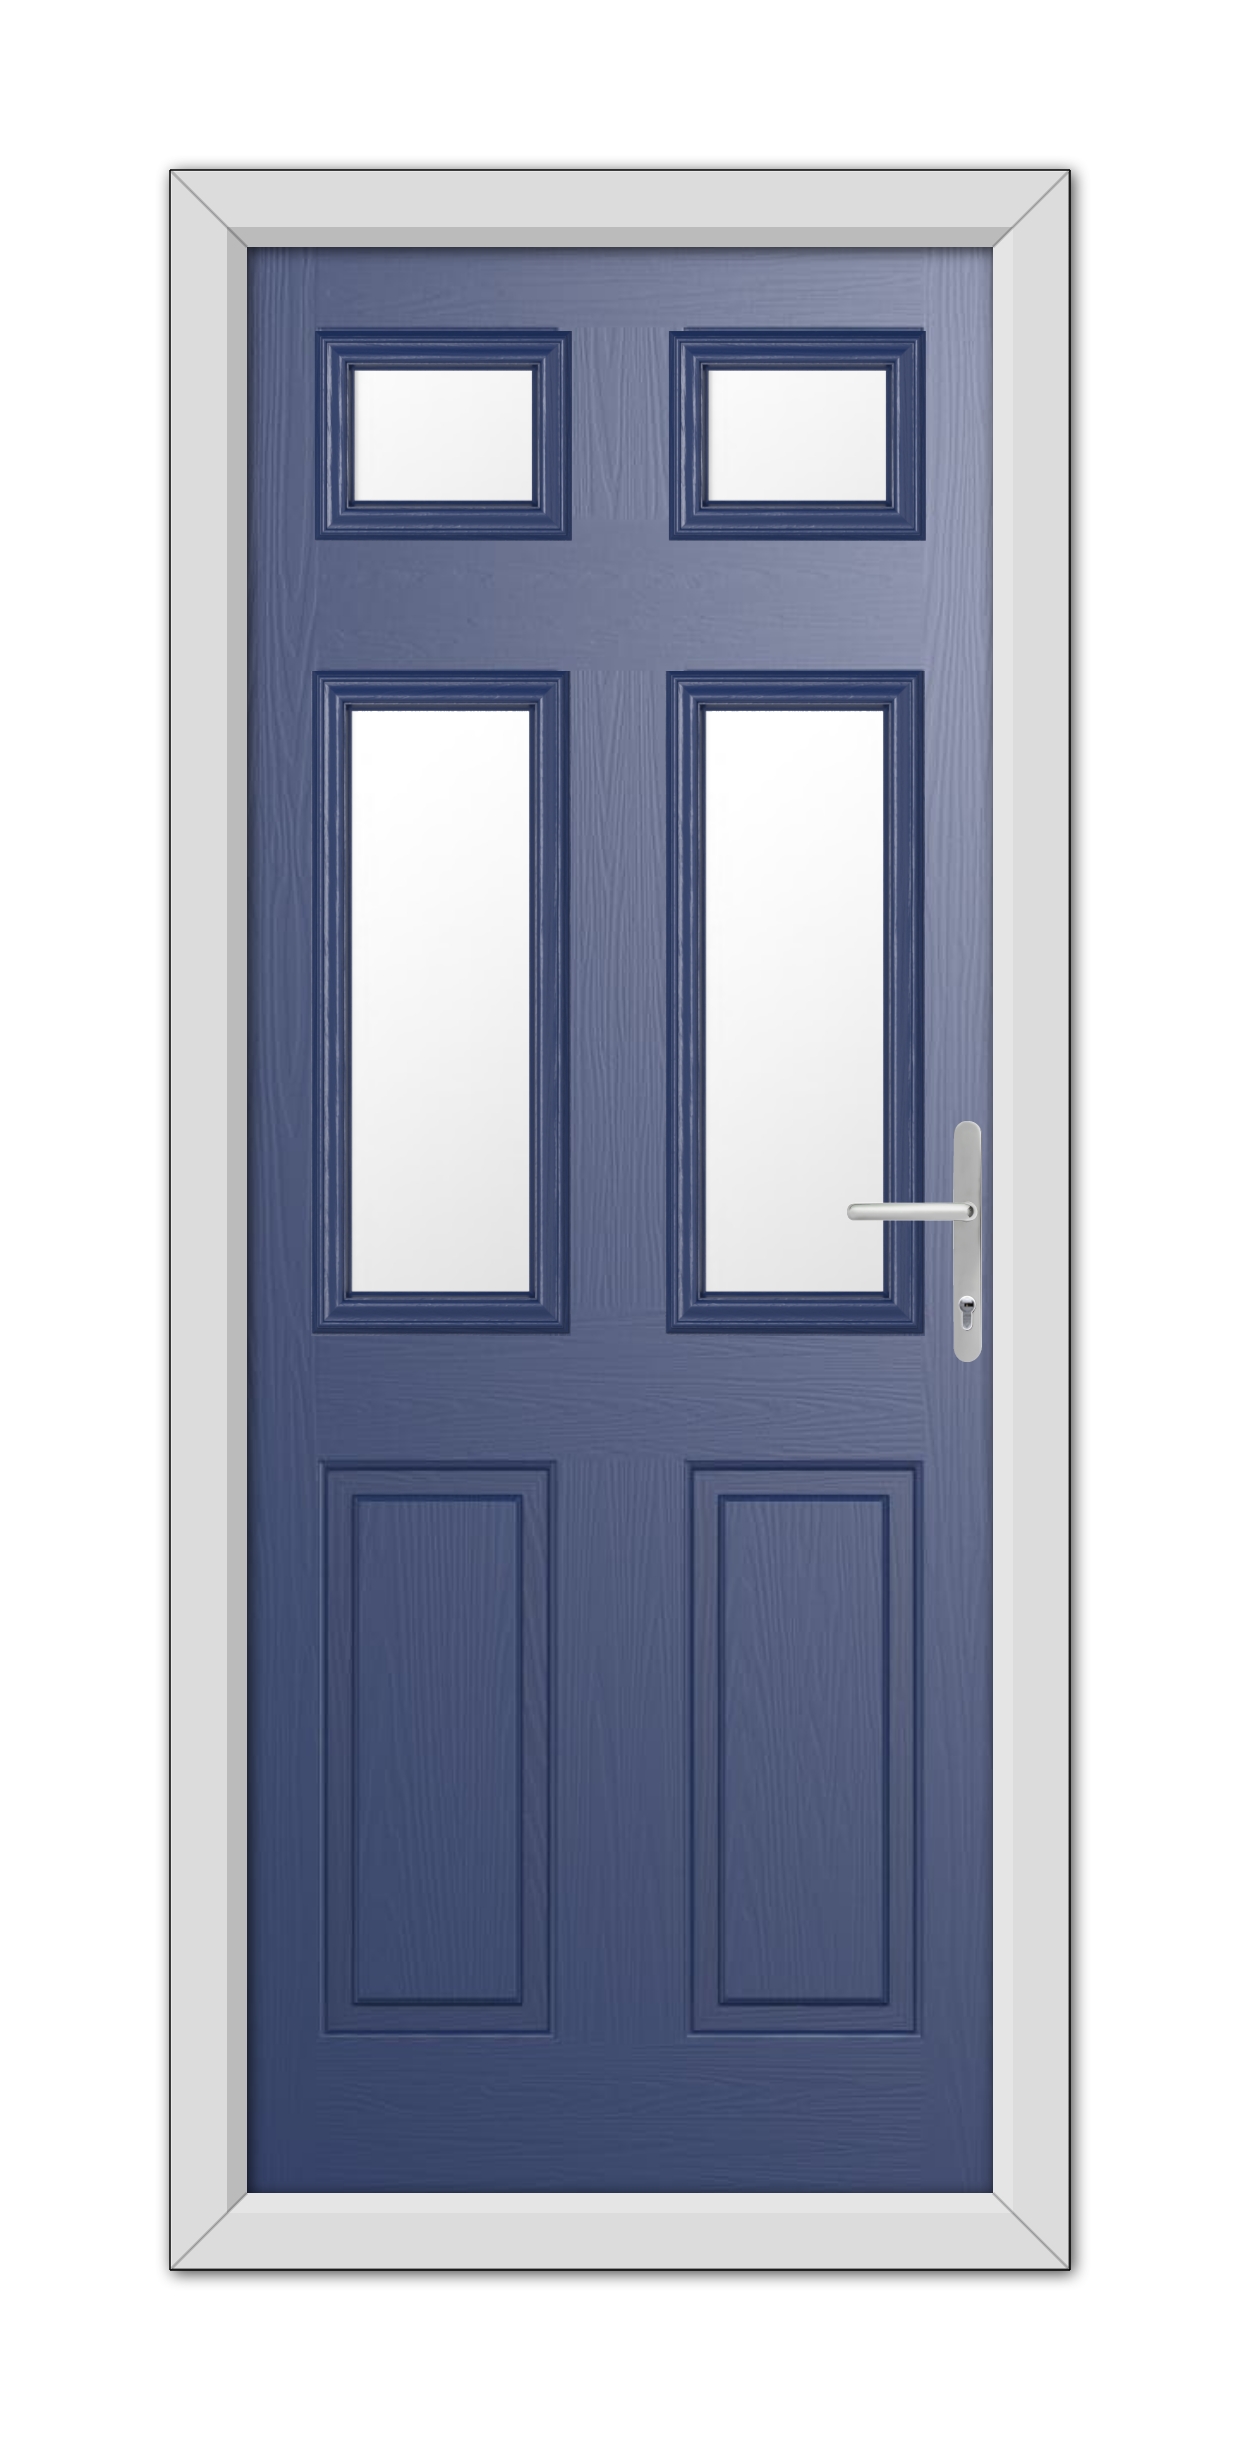 A modern Blue Middleton Glazed 4 Composite Door with glass panels at the top, equipped with a silver handle and framed in white.